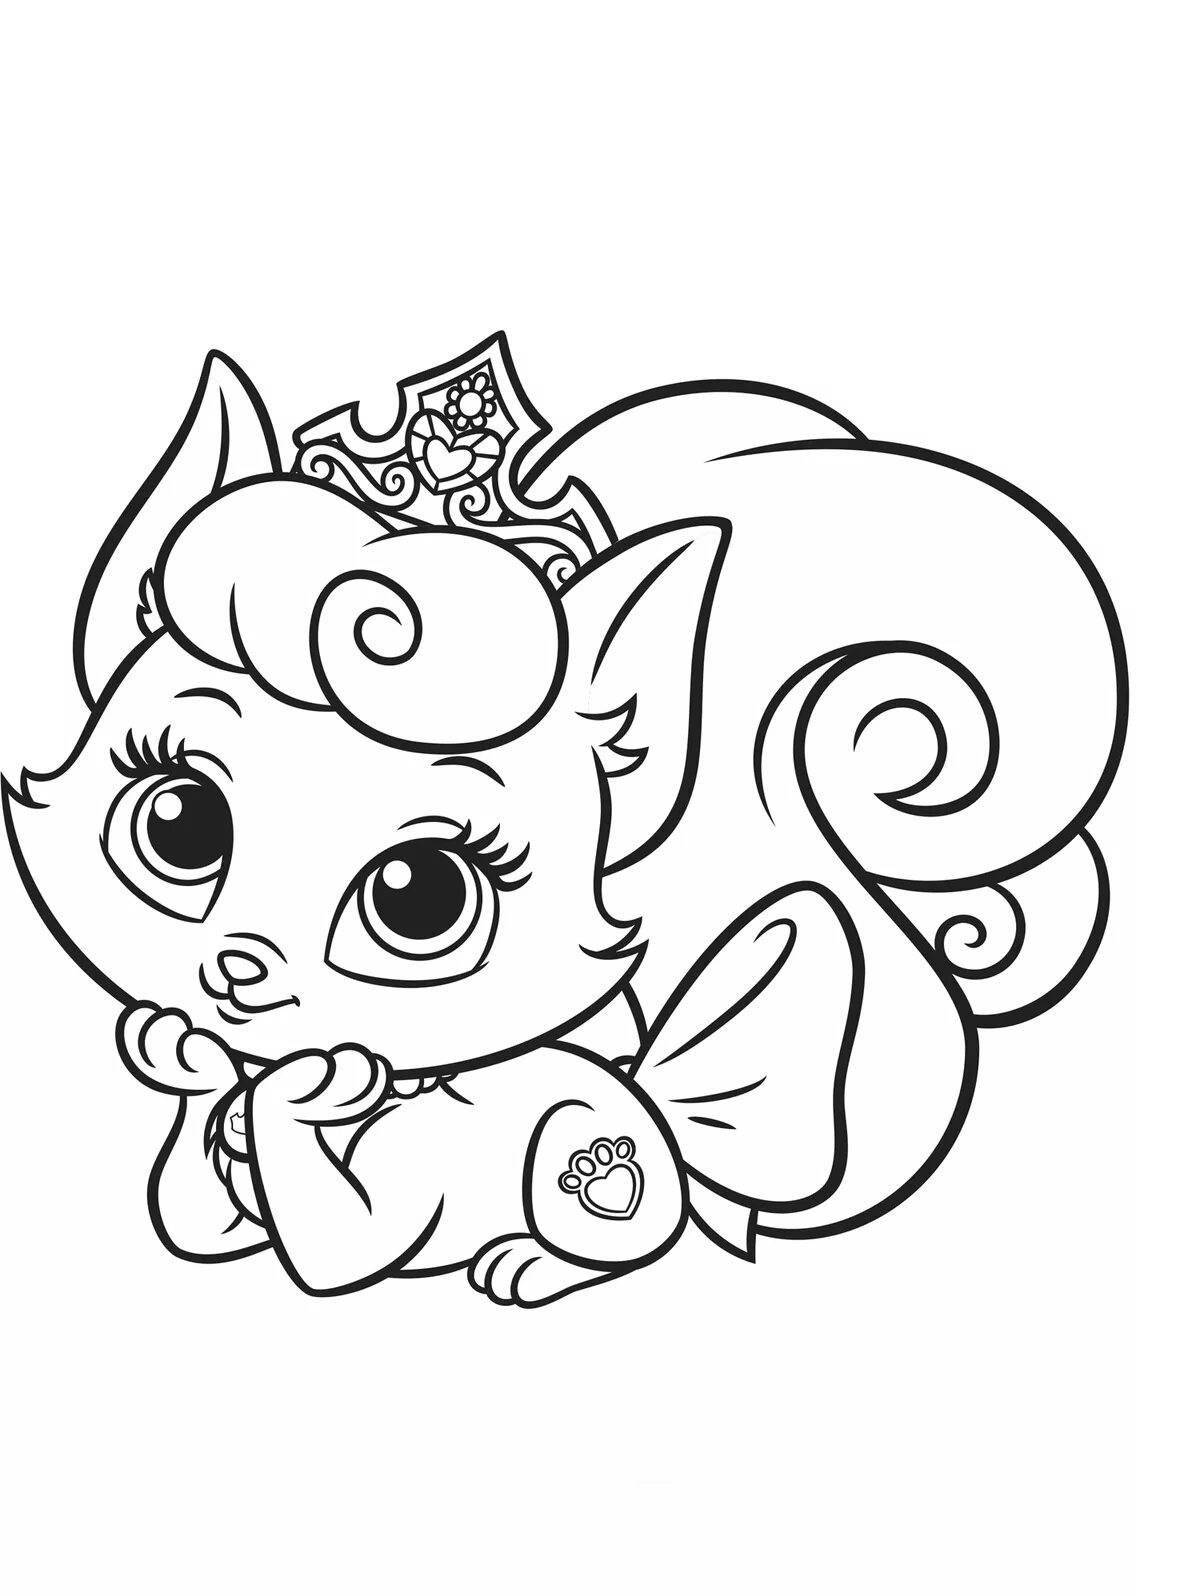 Coloring page adorable furry stories